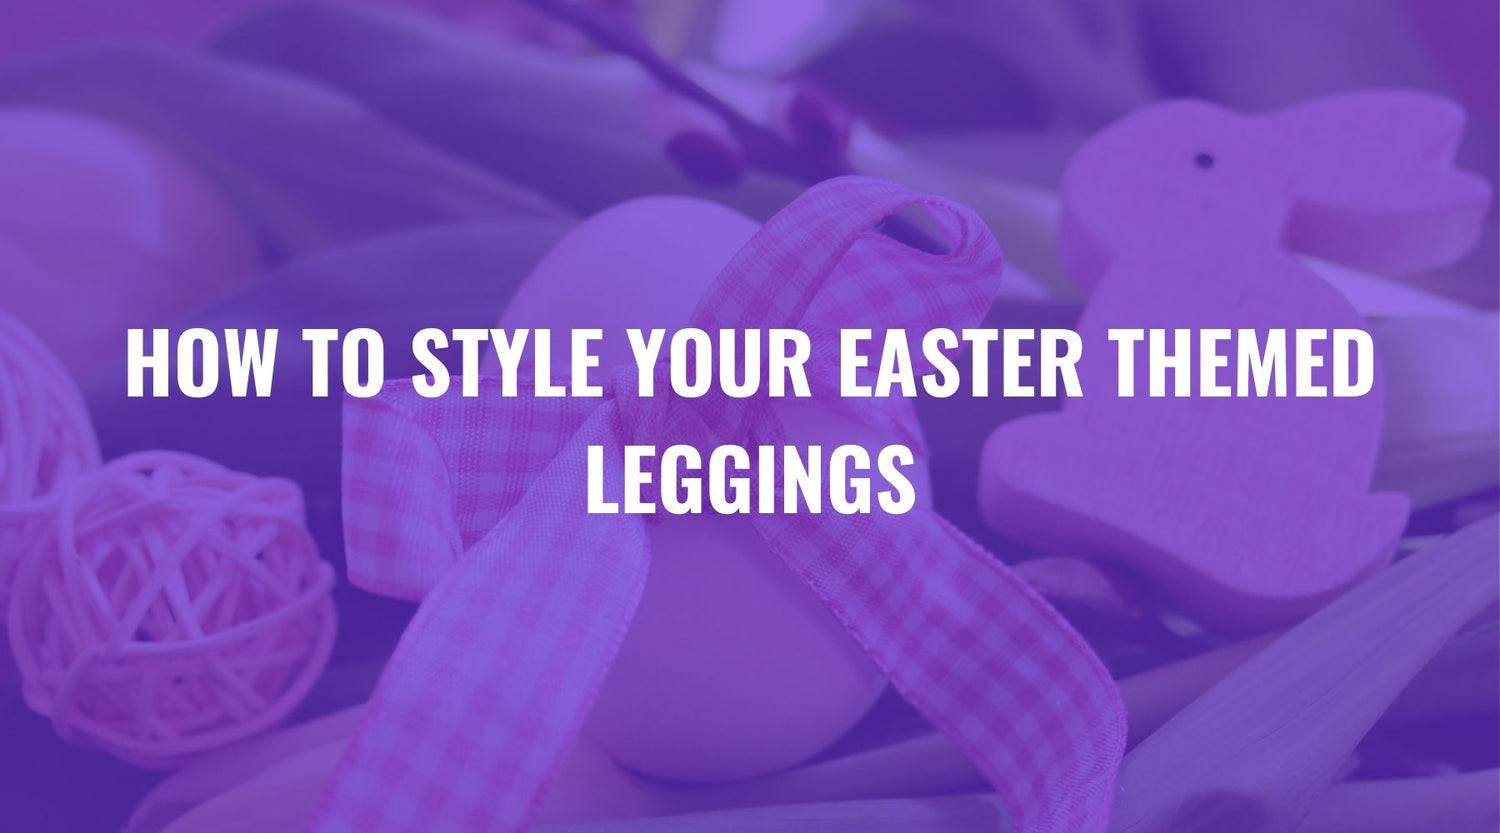 How to Style Your Easter Themed Leggings